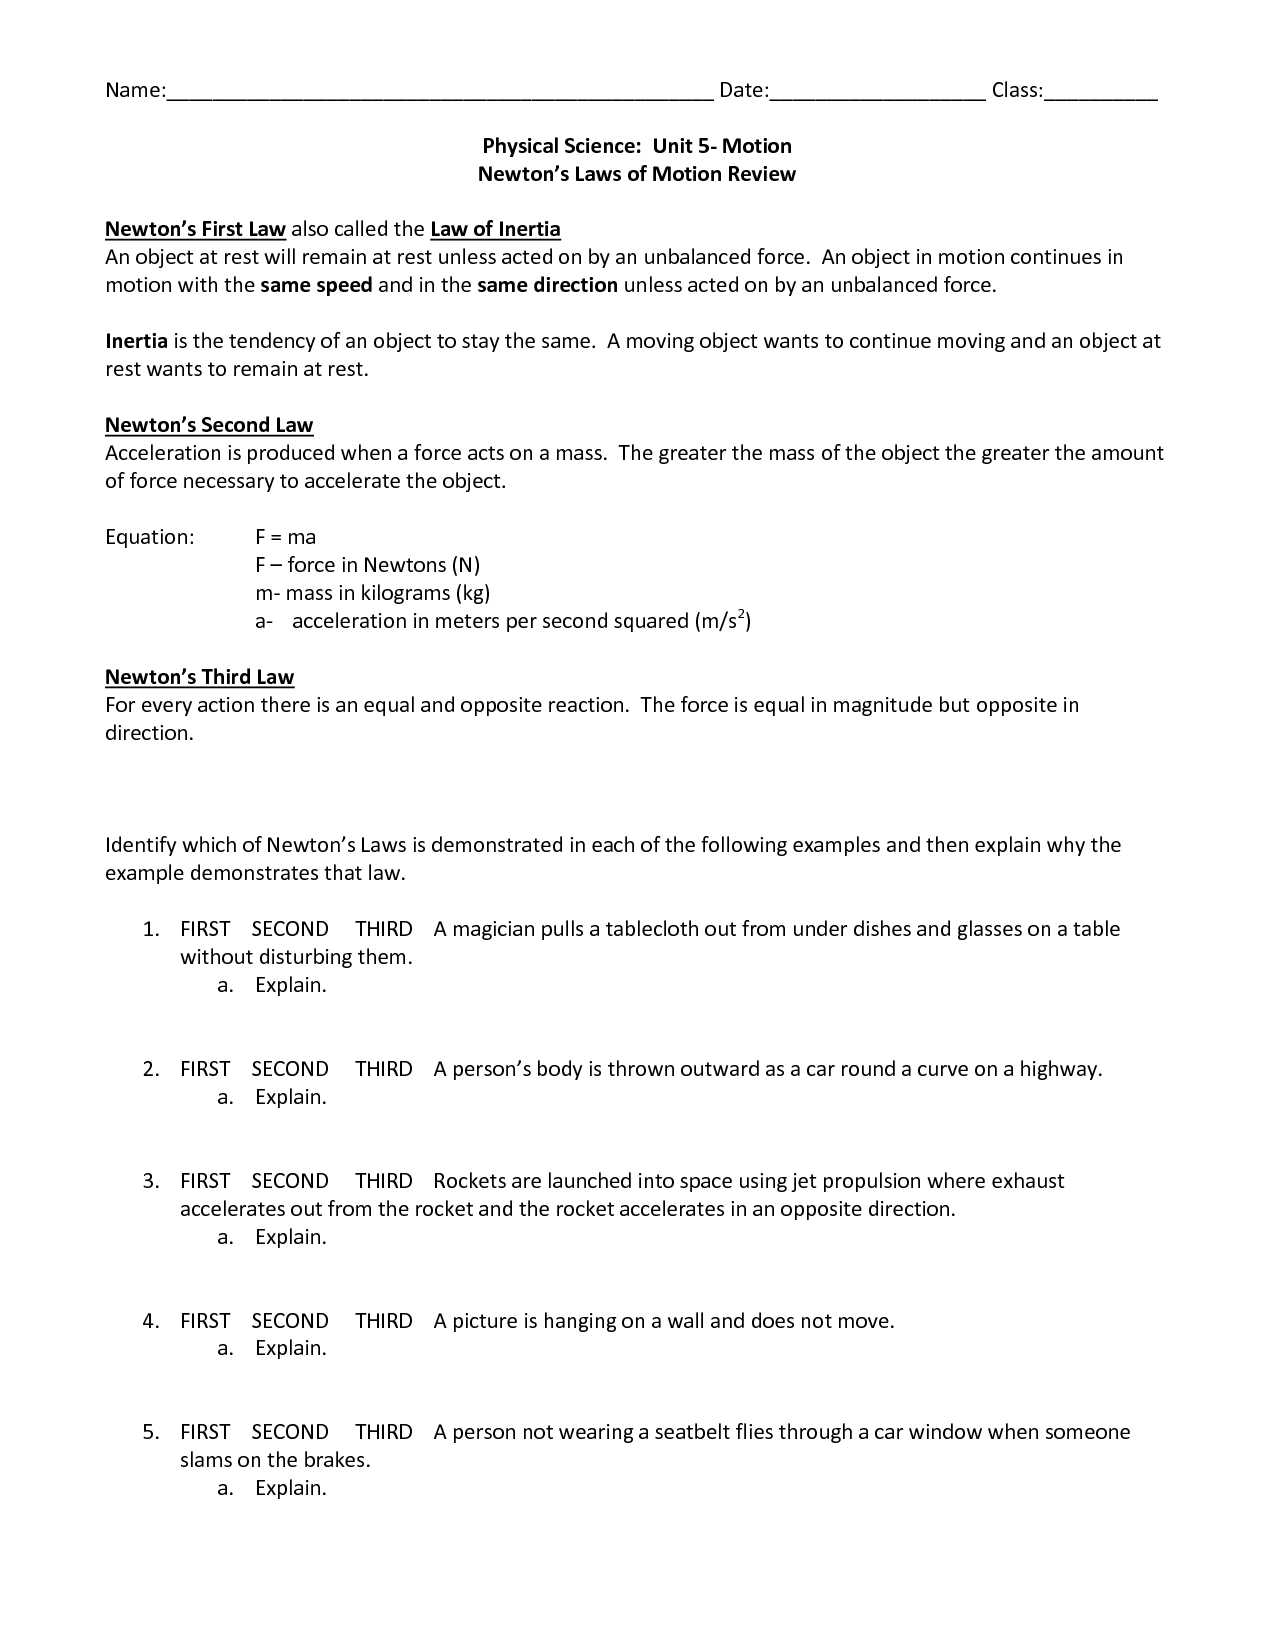 Physical Science Worksheet Conservation Of Energy 2 Answer Key Along with Physical Science Worksheets Answers the Best Worksheets Image